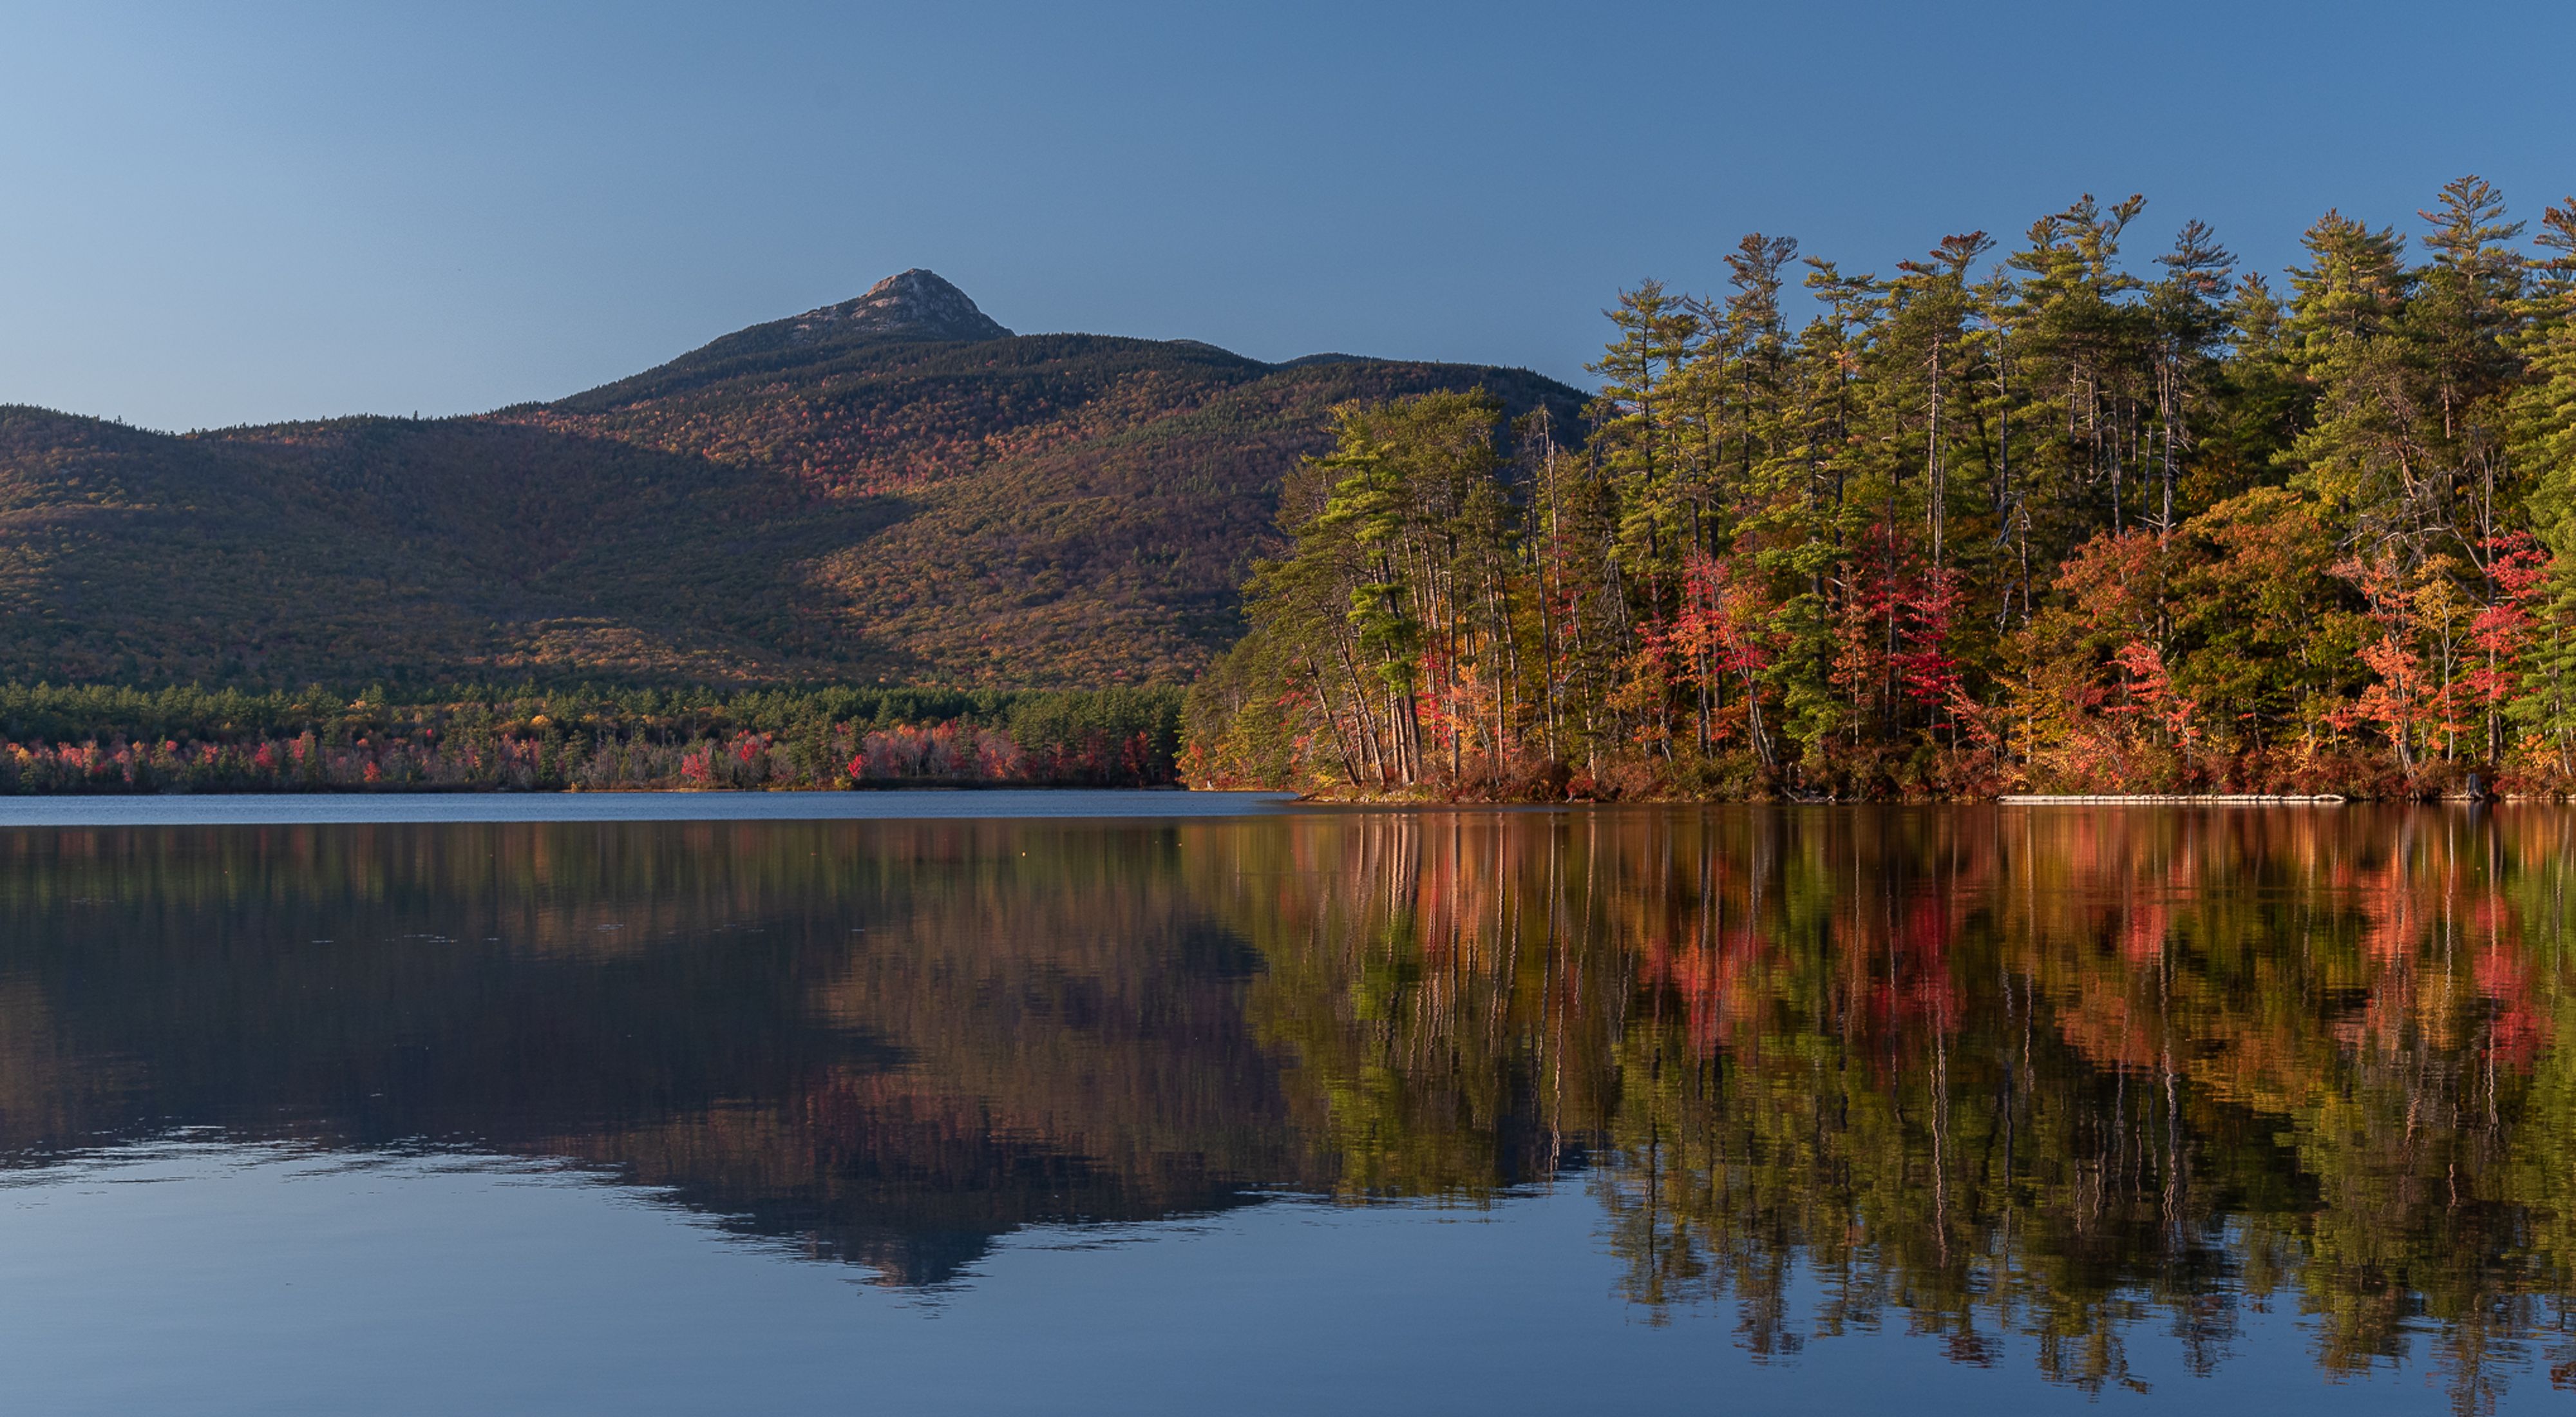 Fall colors in trees along a lake with a mountain in the background.